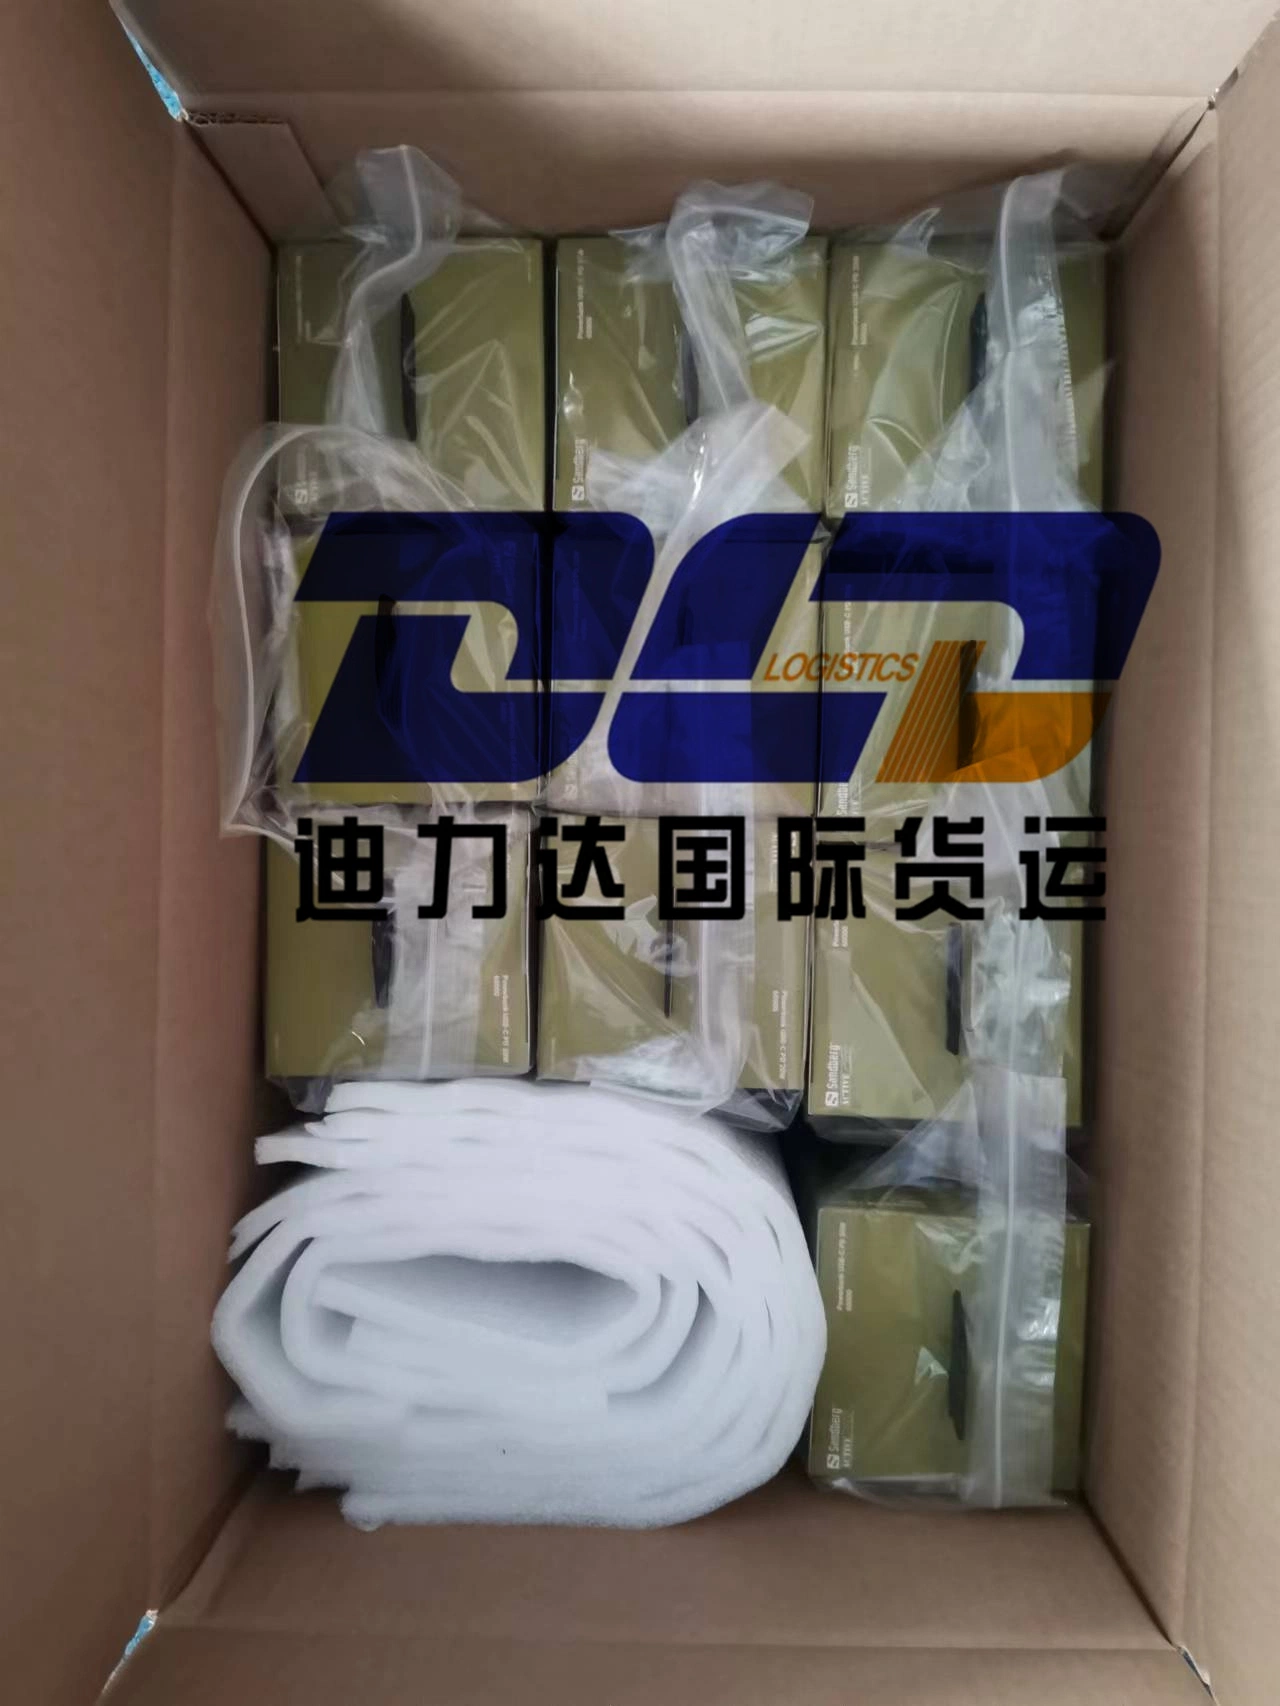 Express Logistics to Transport Power Bank by Air Freight Air Shipment UPS FedEx DHL Door to Door